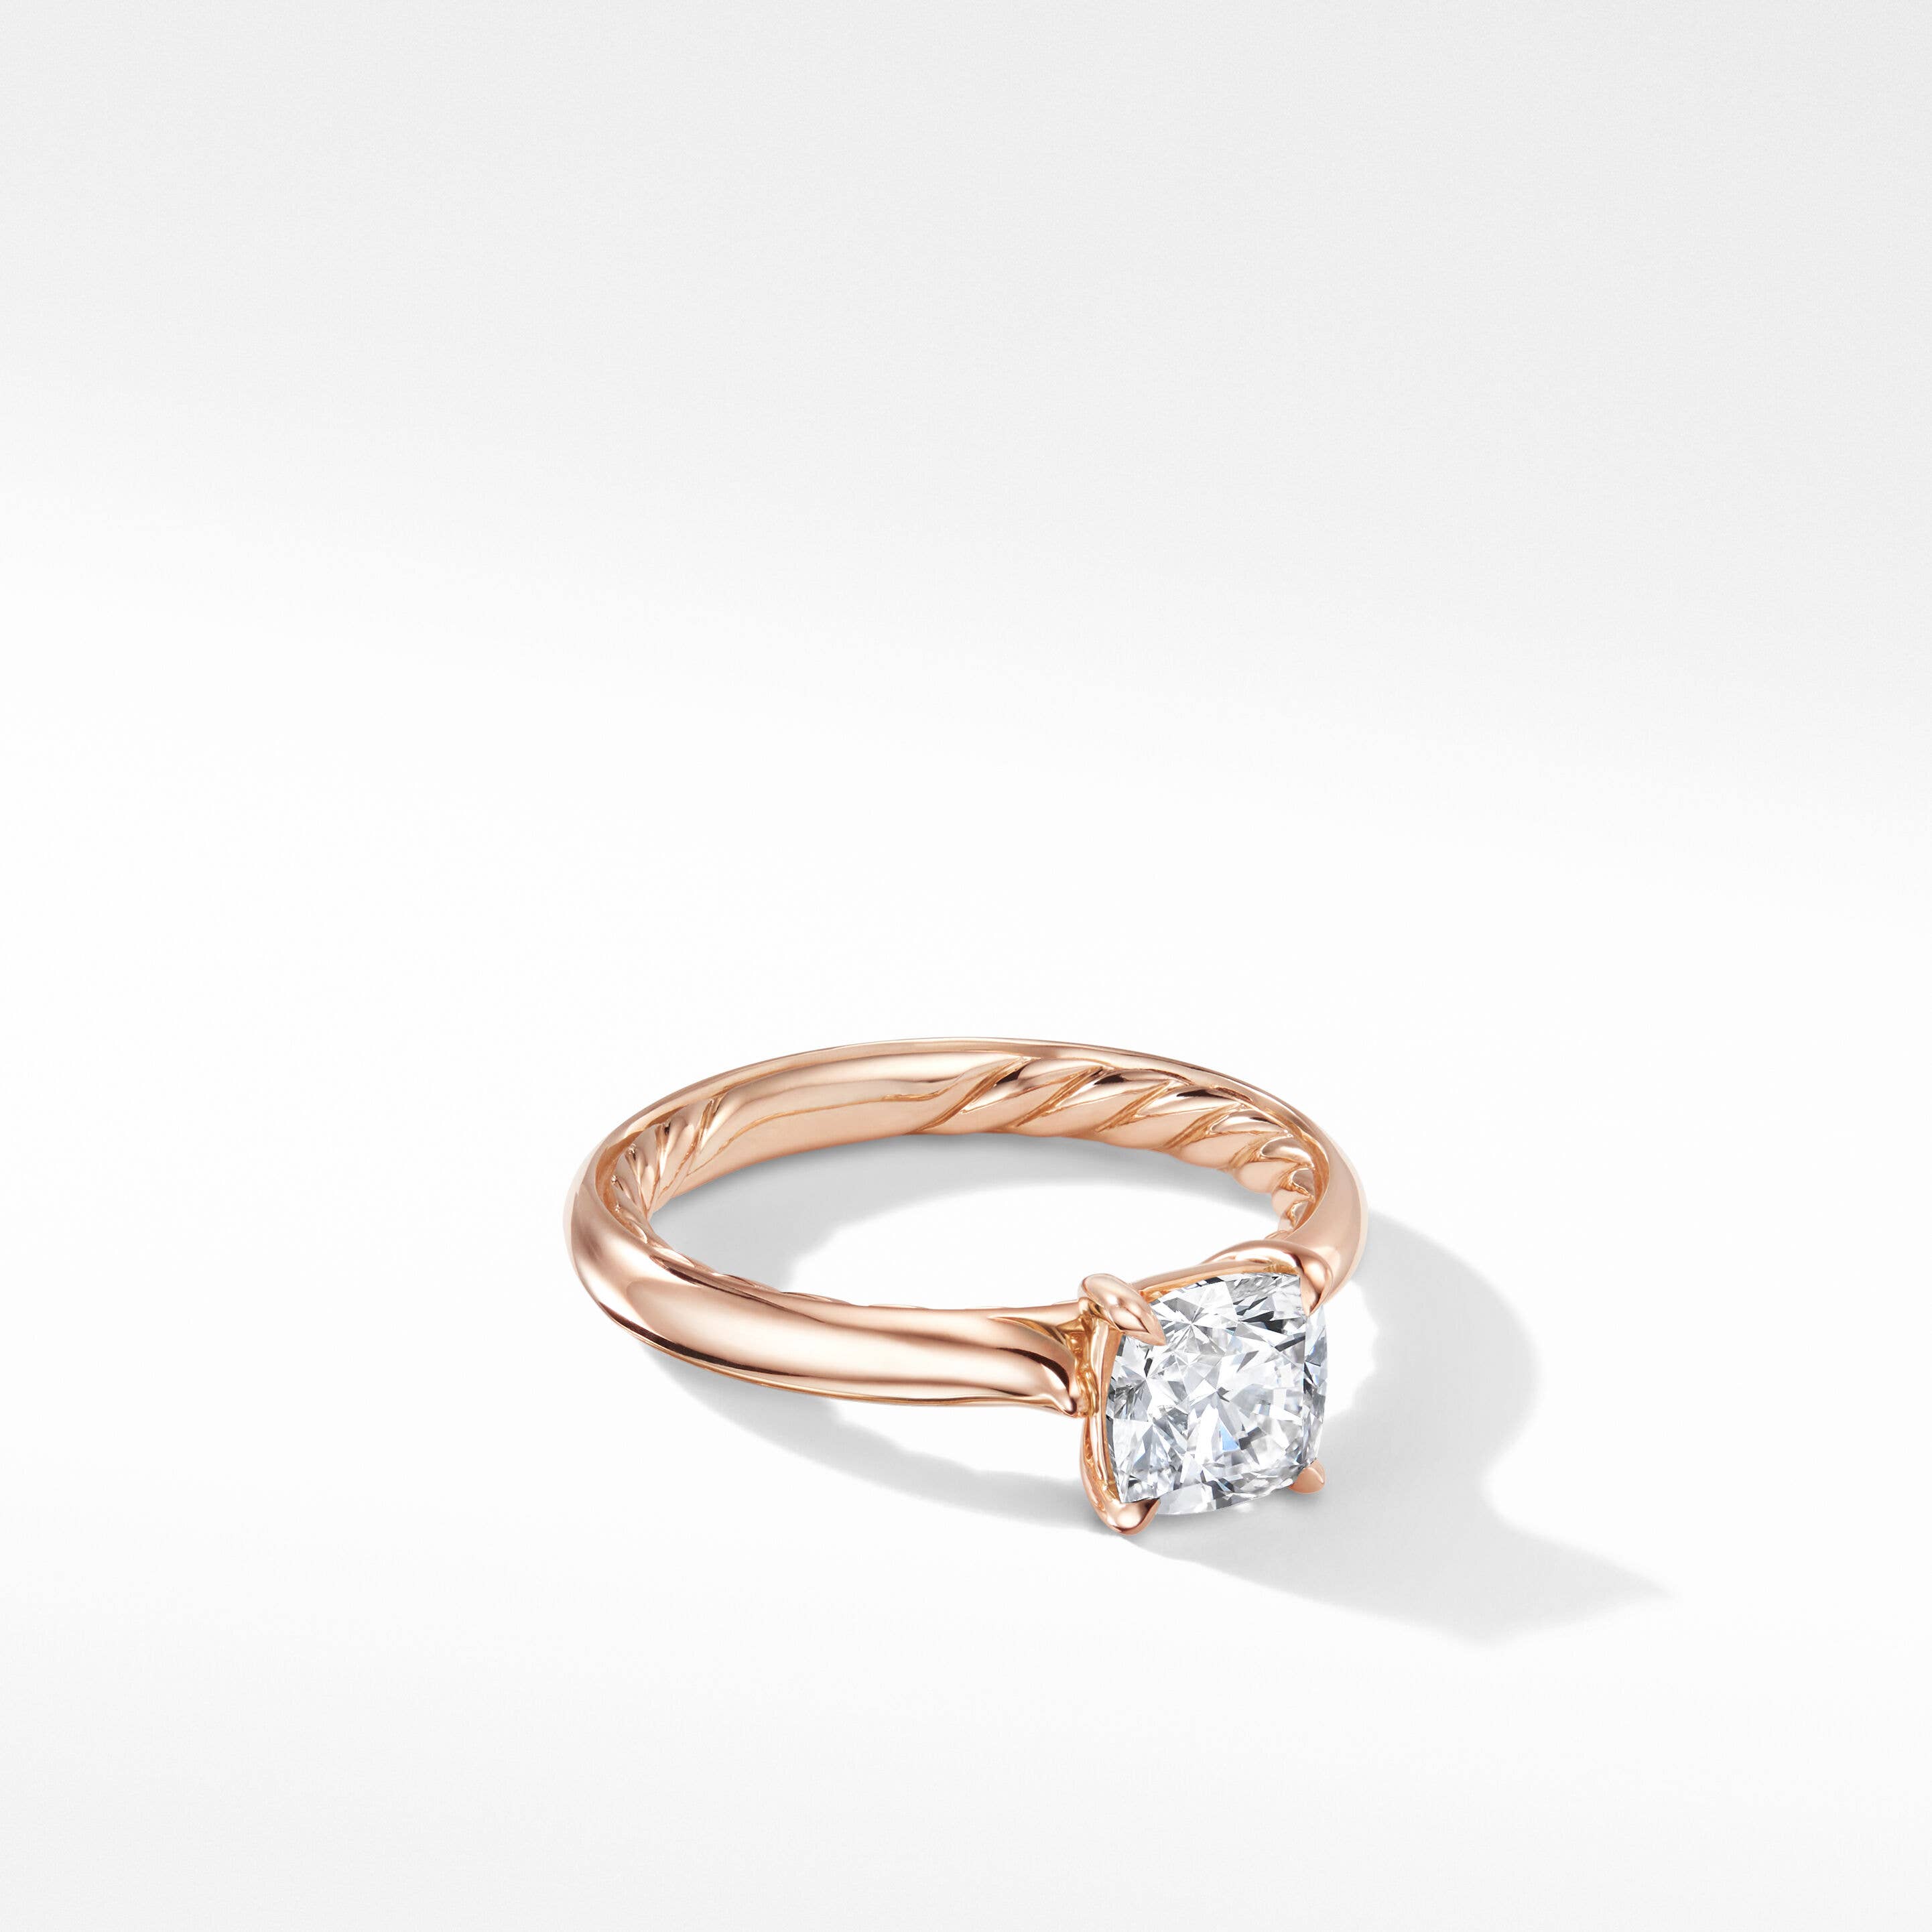 DY Eden Engagement Ring in 18K Rose Gold, Cushion